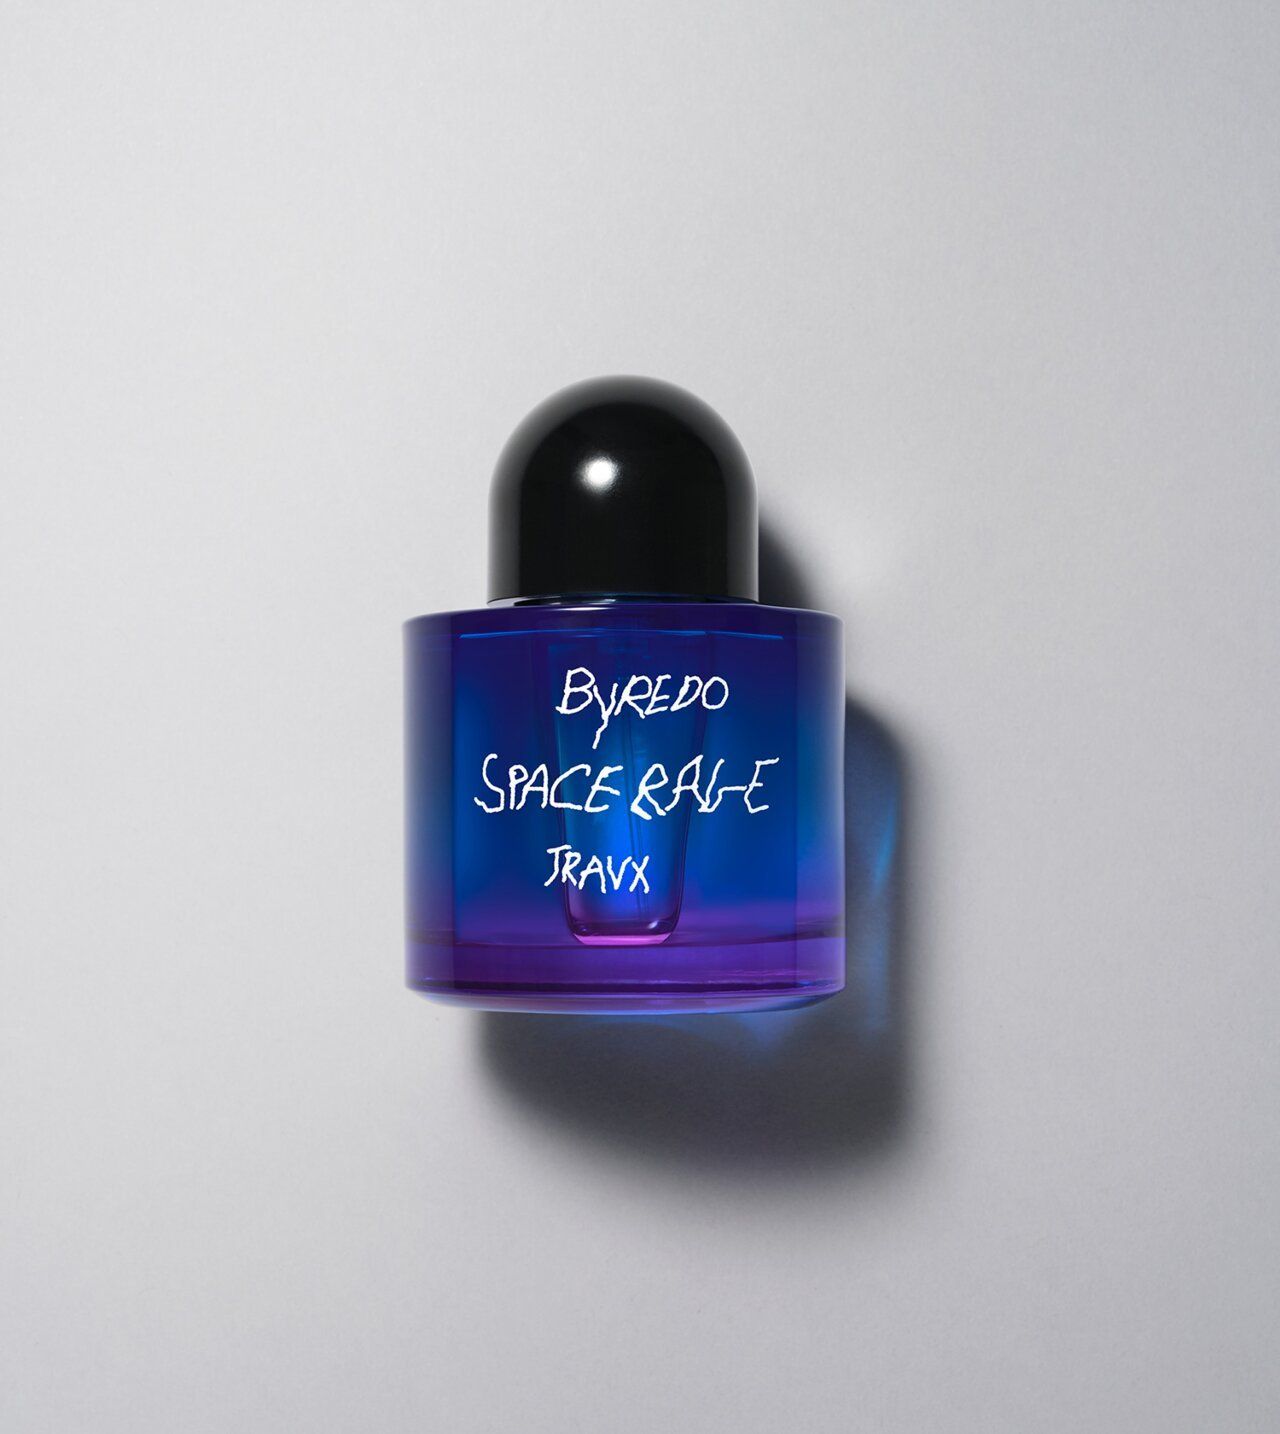 How to Get Travis Scott's Byredo Collection Candle and Fragrance